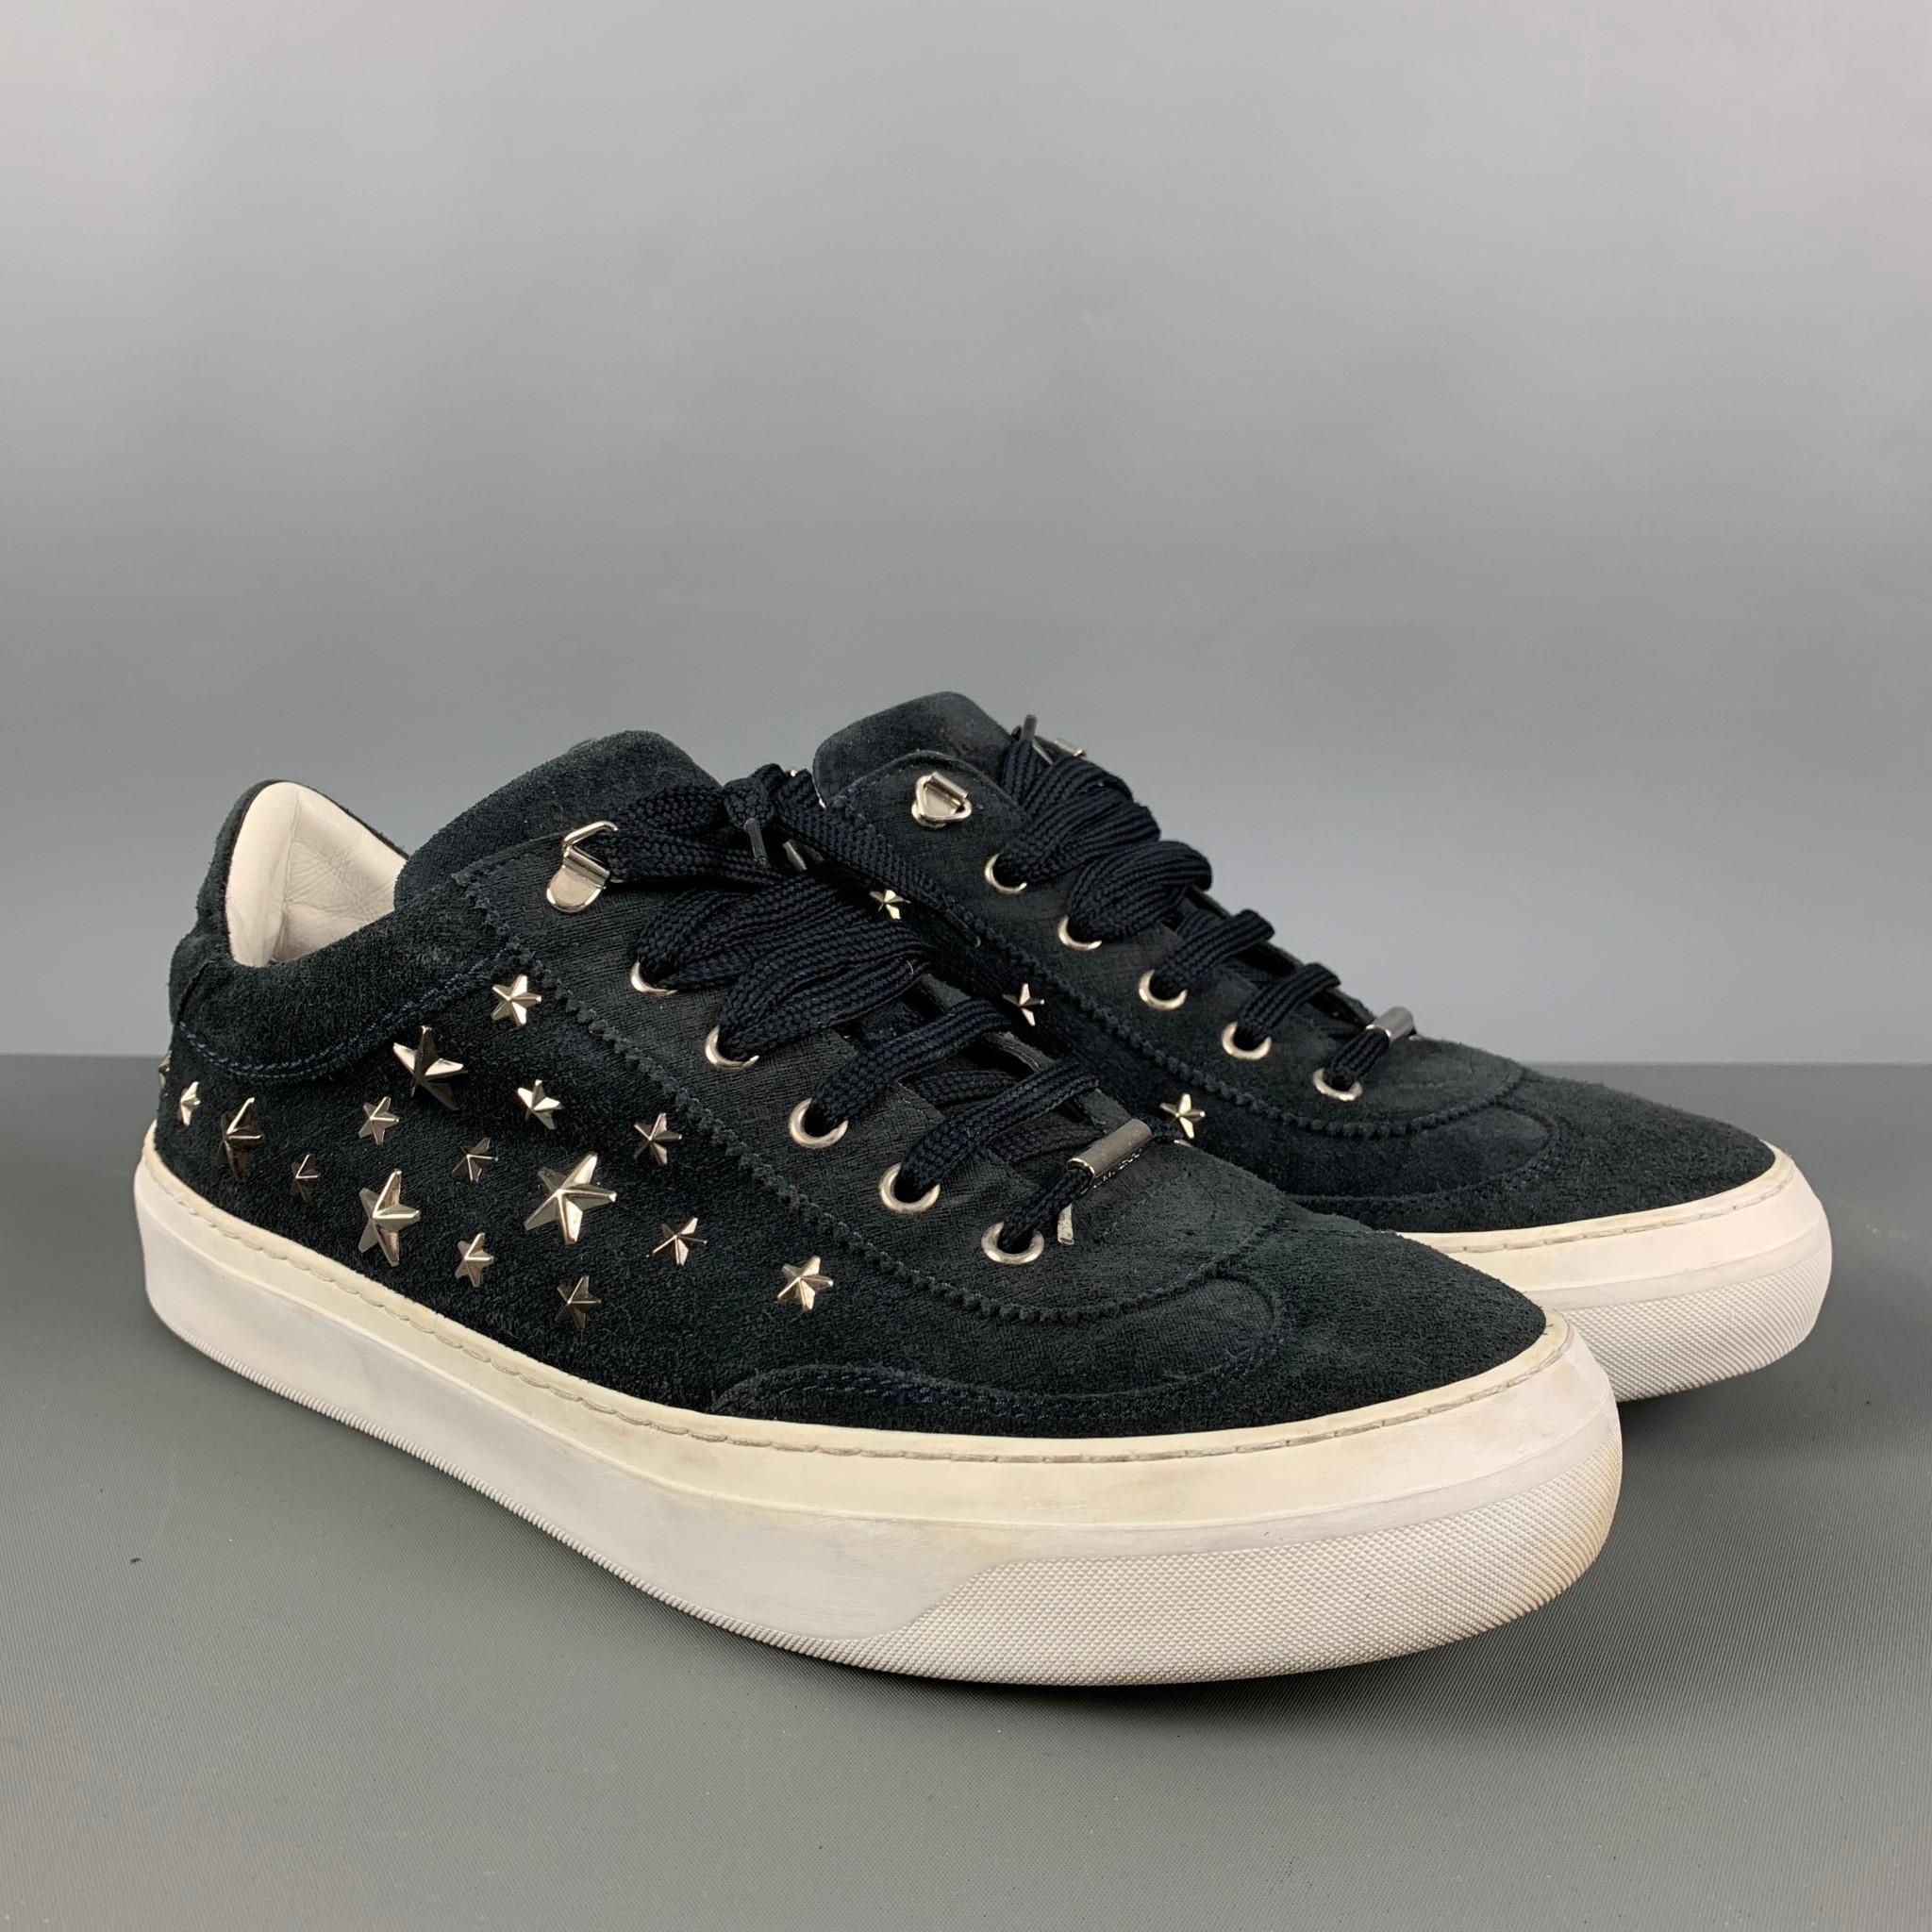 JIMMY CHOO sneakers comes in a black suede featuring silver stars details, rubber sole, and a lace up closure. Made in Italy.

Good Pre-Owned Condition.
Marked: 43

Outsole: 12 in. x 4.25 in.  

SKU: 124642
Category: Sneakers

More Details
Brand: